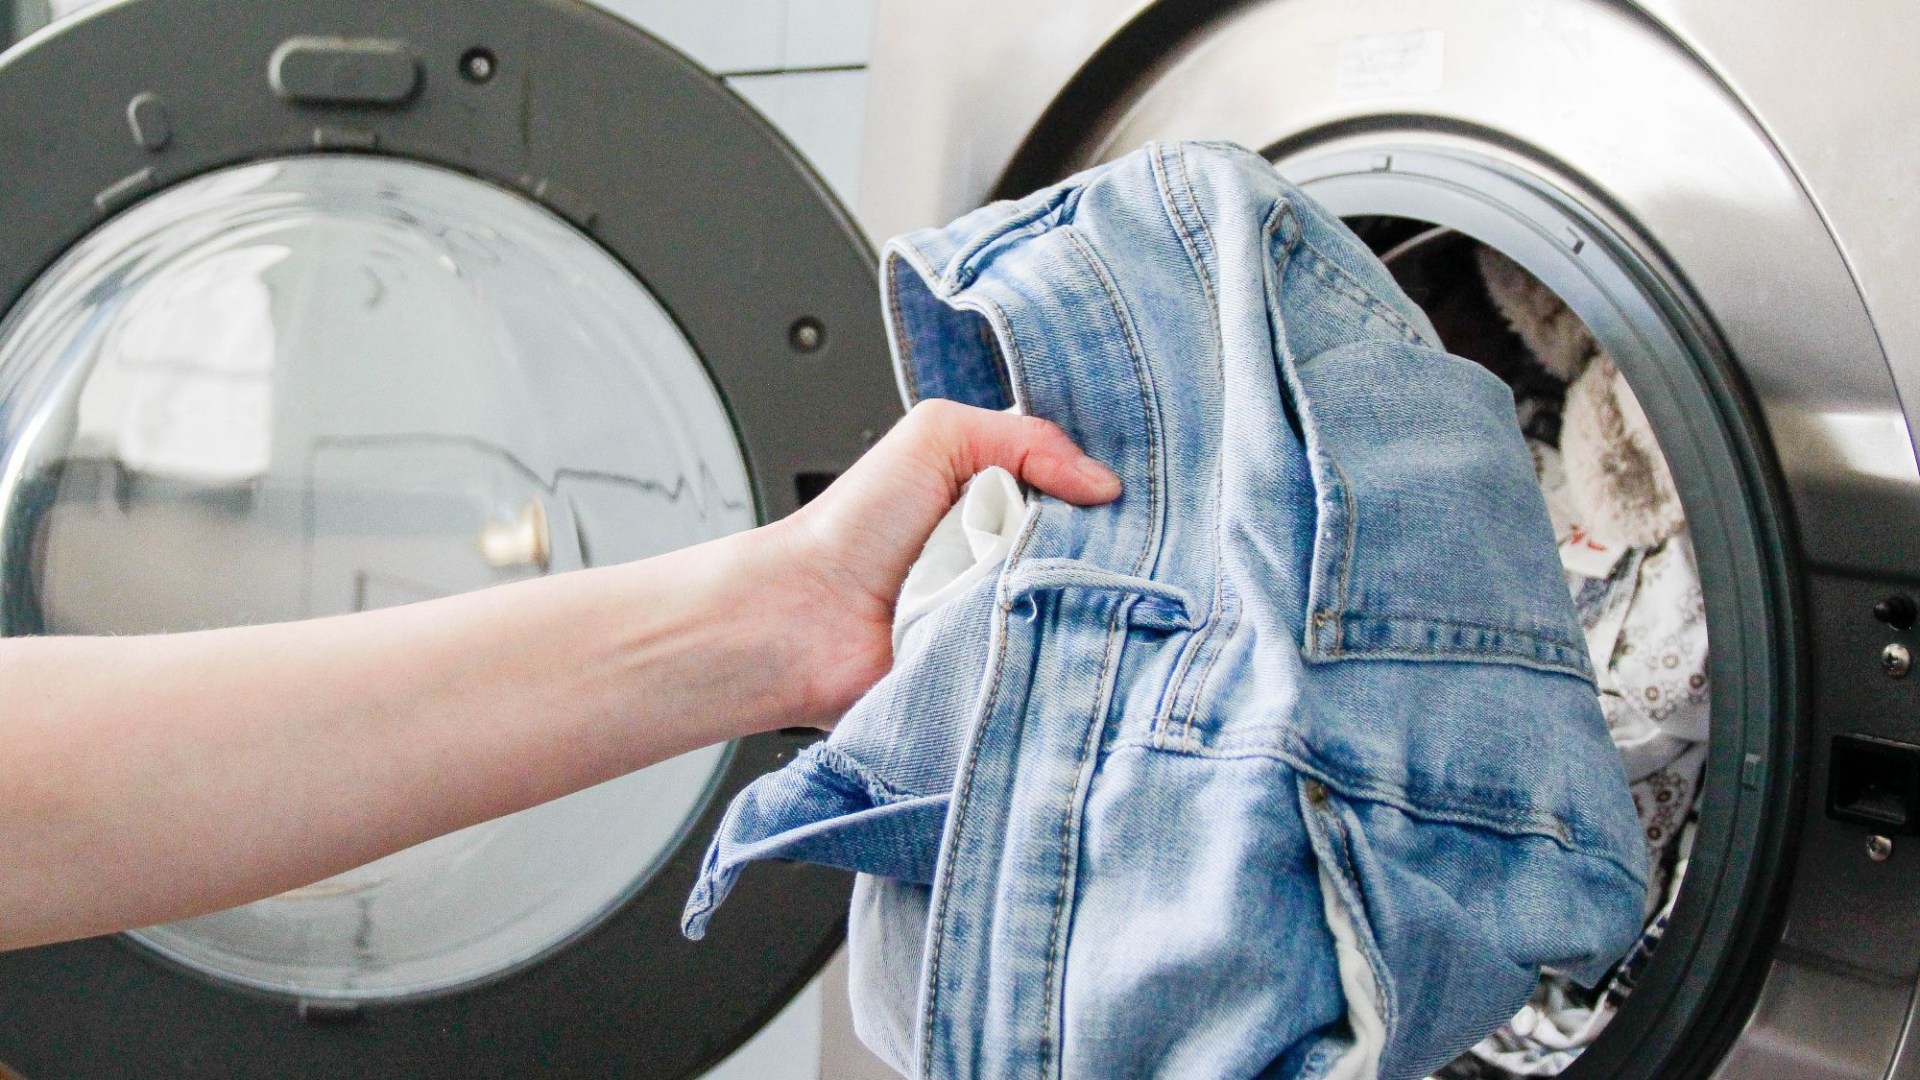 My laundry trick sounds a little insane but it gets oil stains out of clothes - even when dish soap won